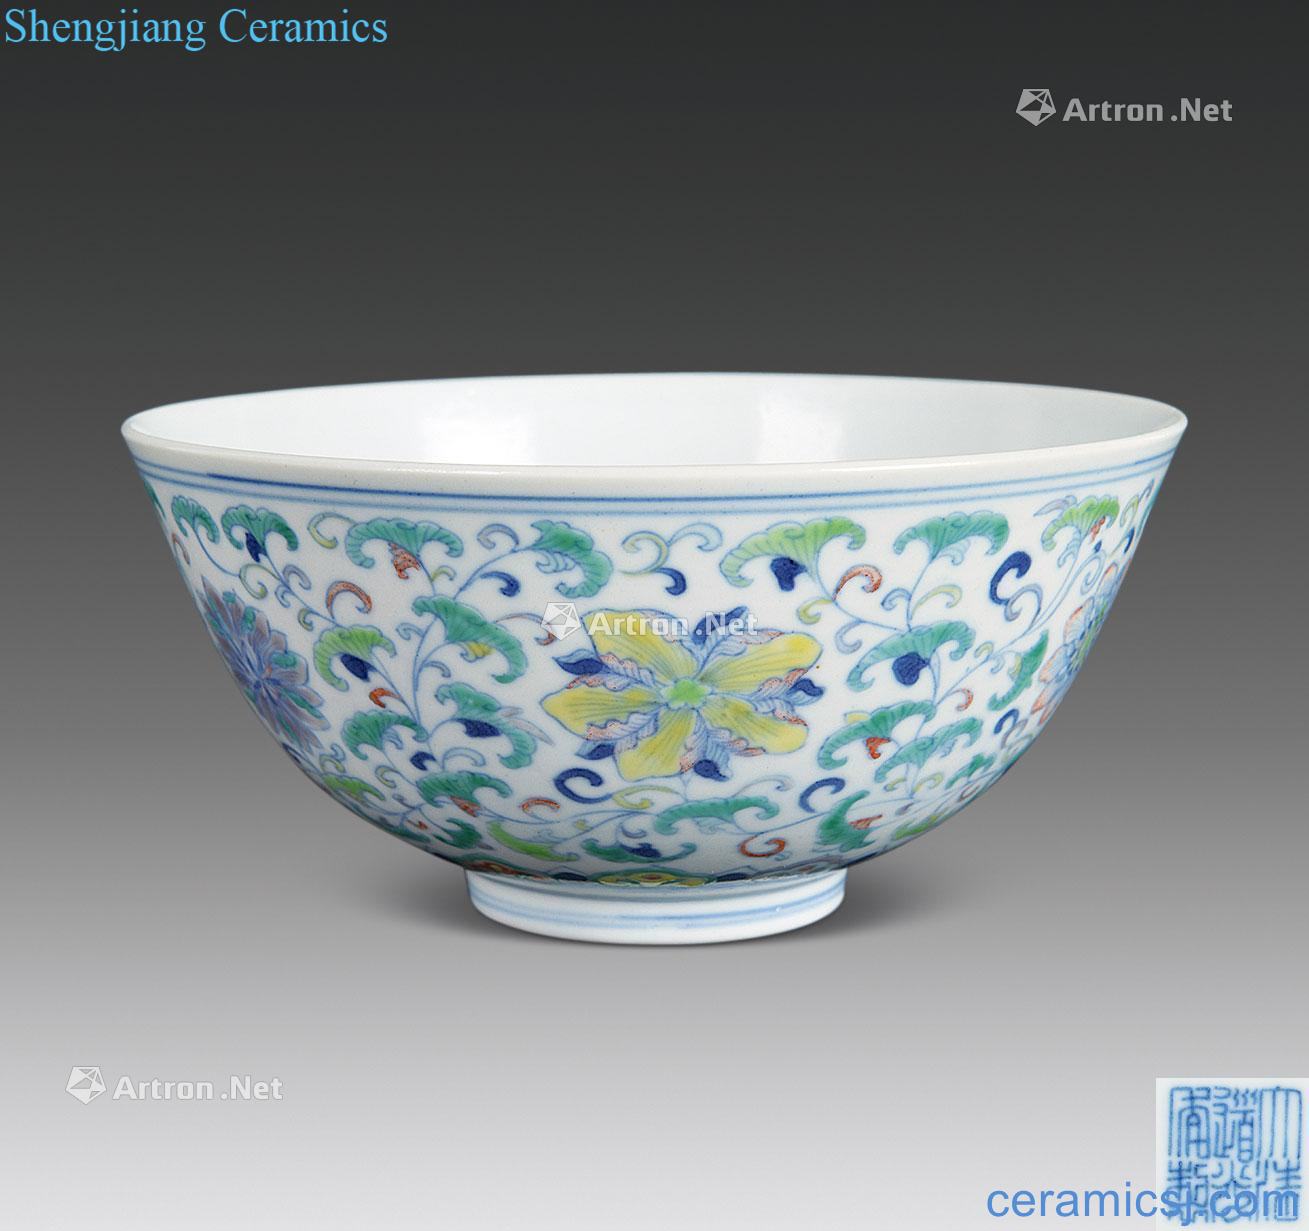 Qing daoguang Dou colors branch flowers green-splashed bowls